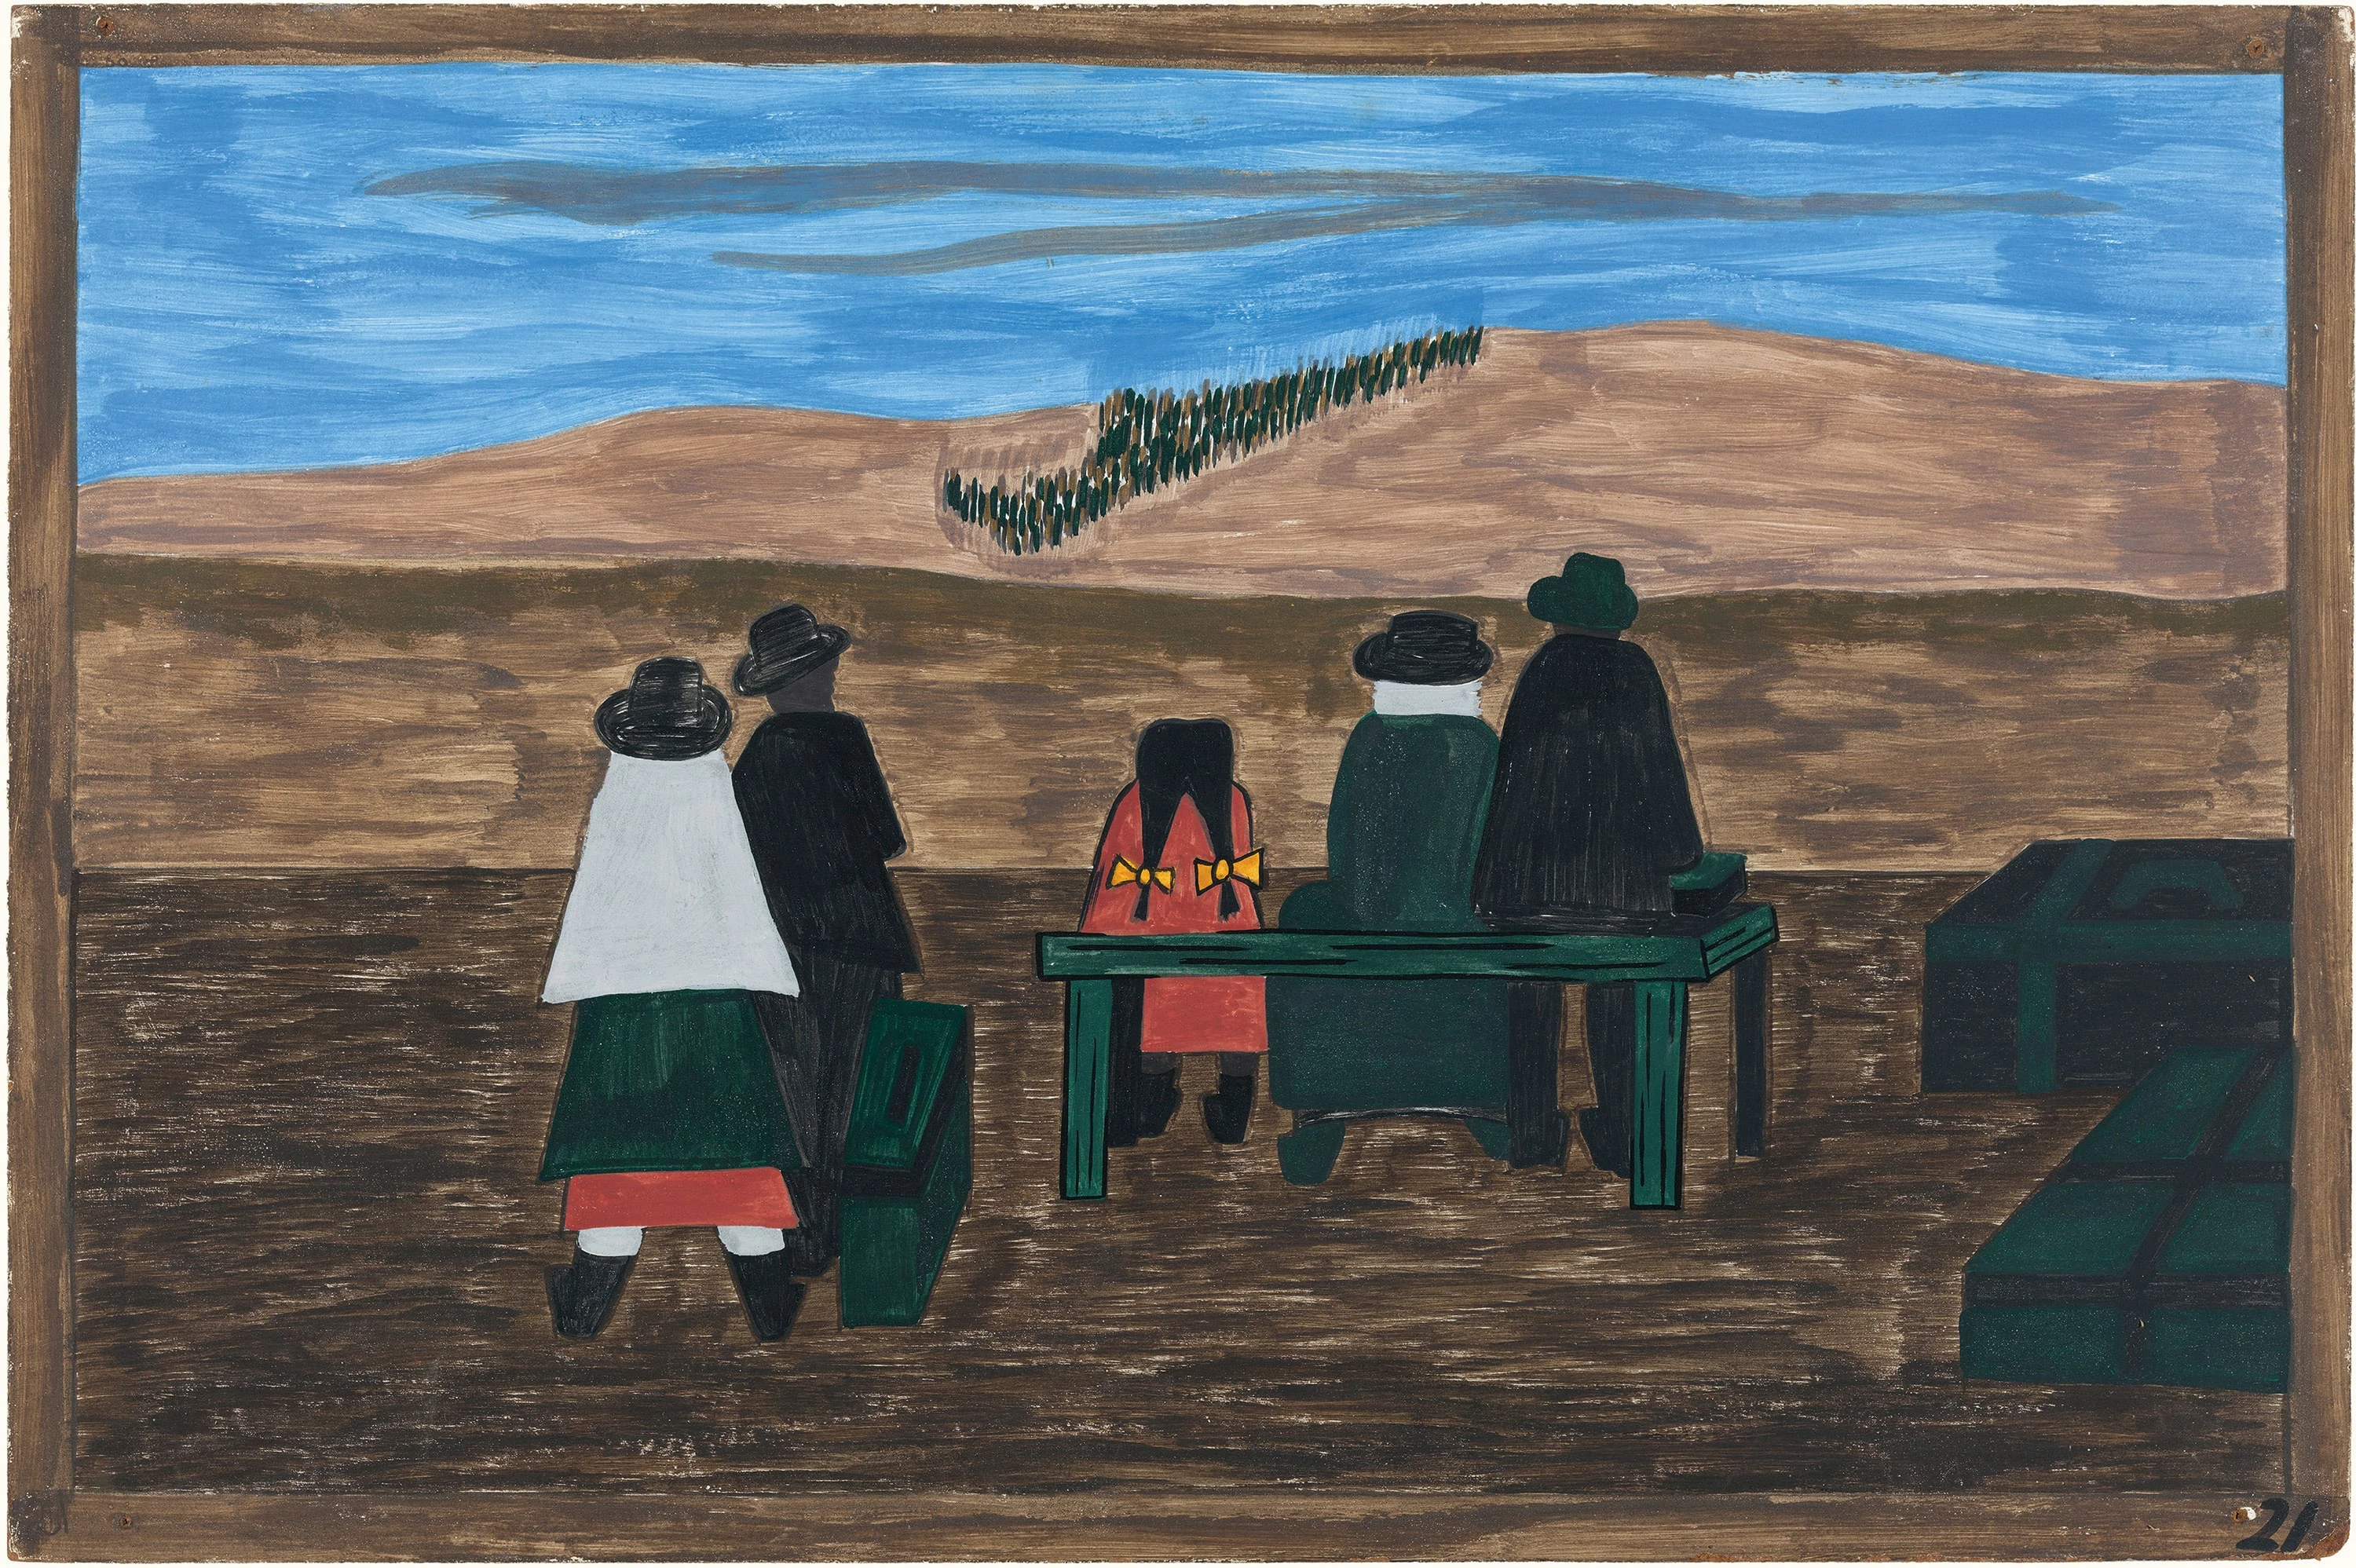 Migration Series No.21: Families arrived at the station very early. They did not wish to miss their trains north, Jacob Lawrence